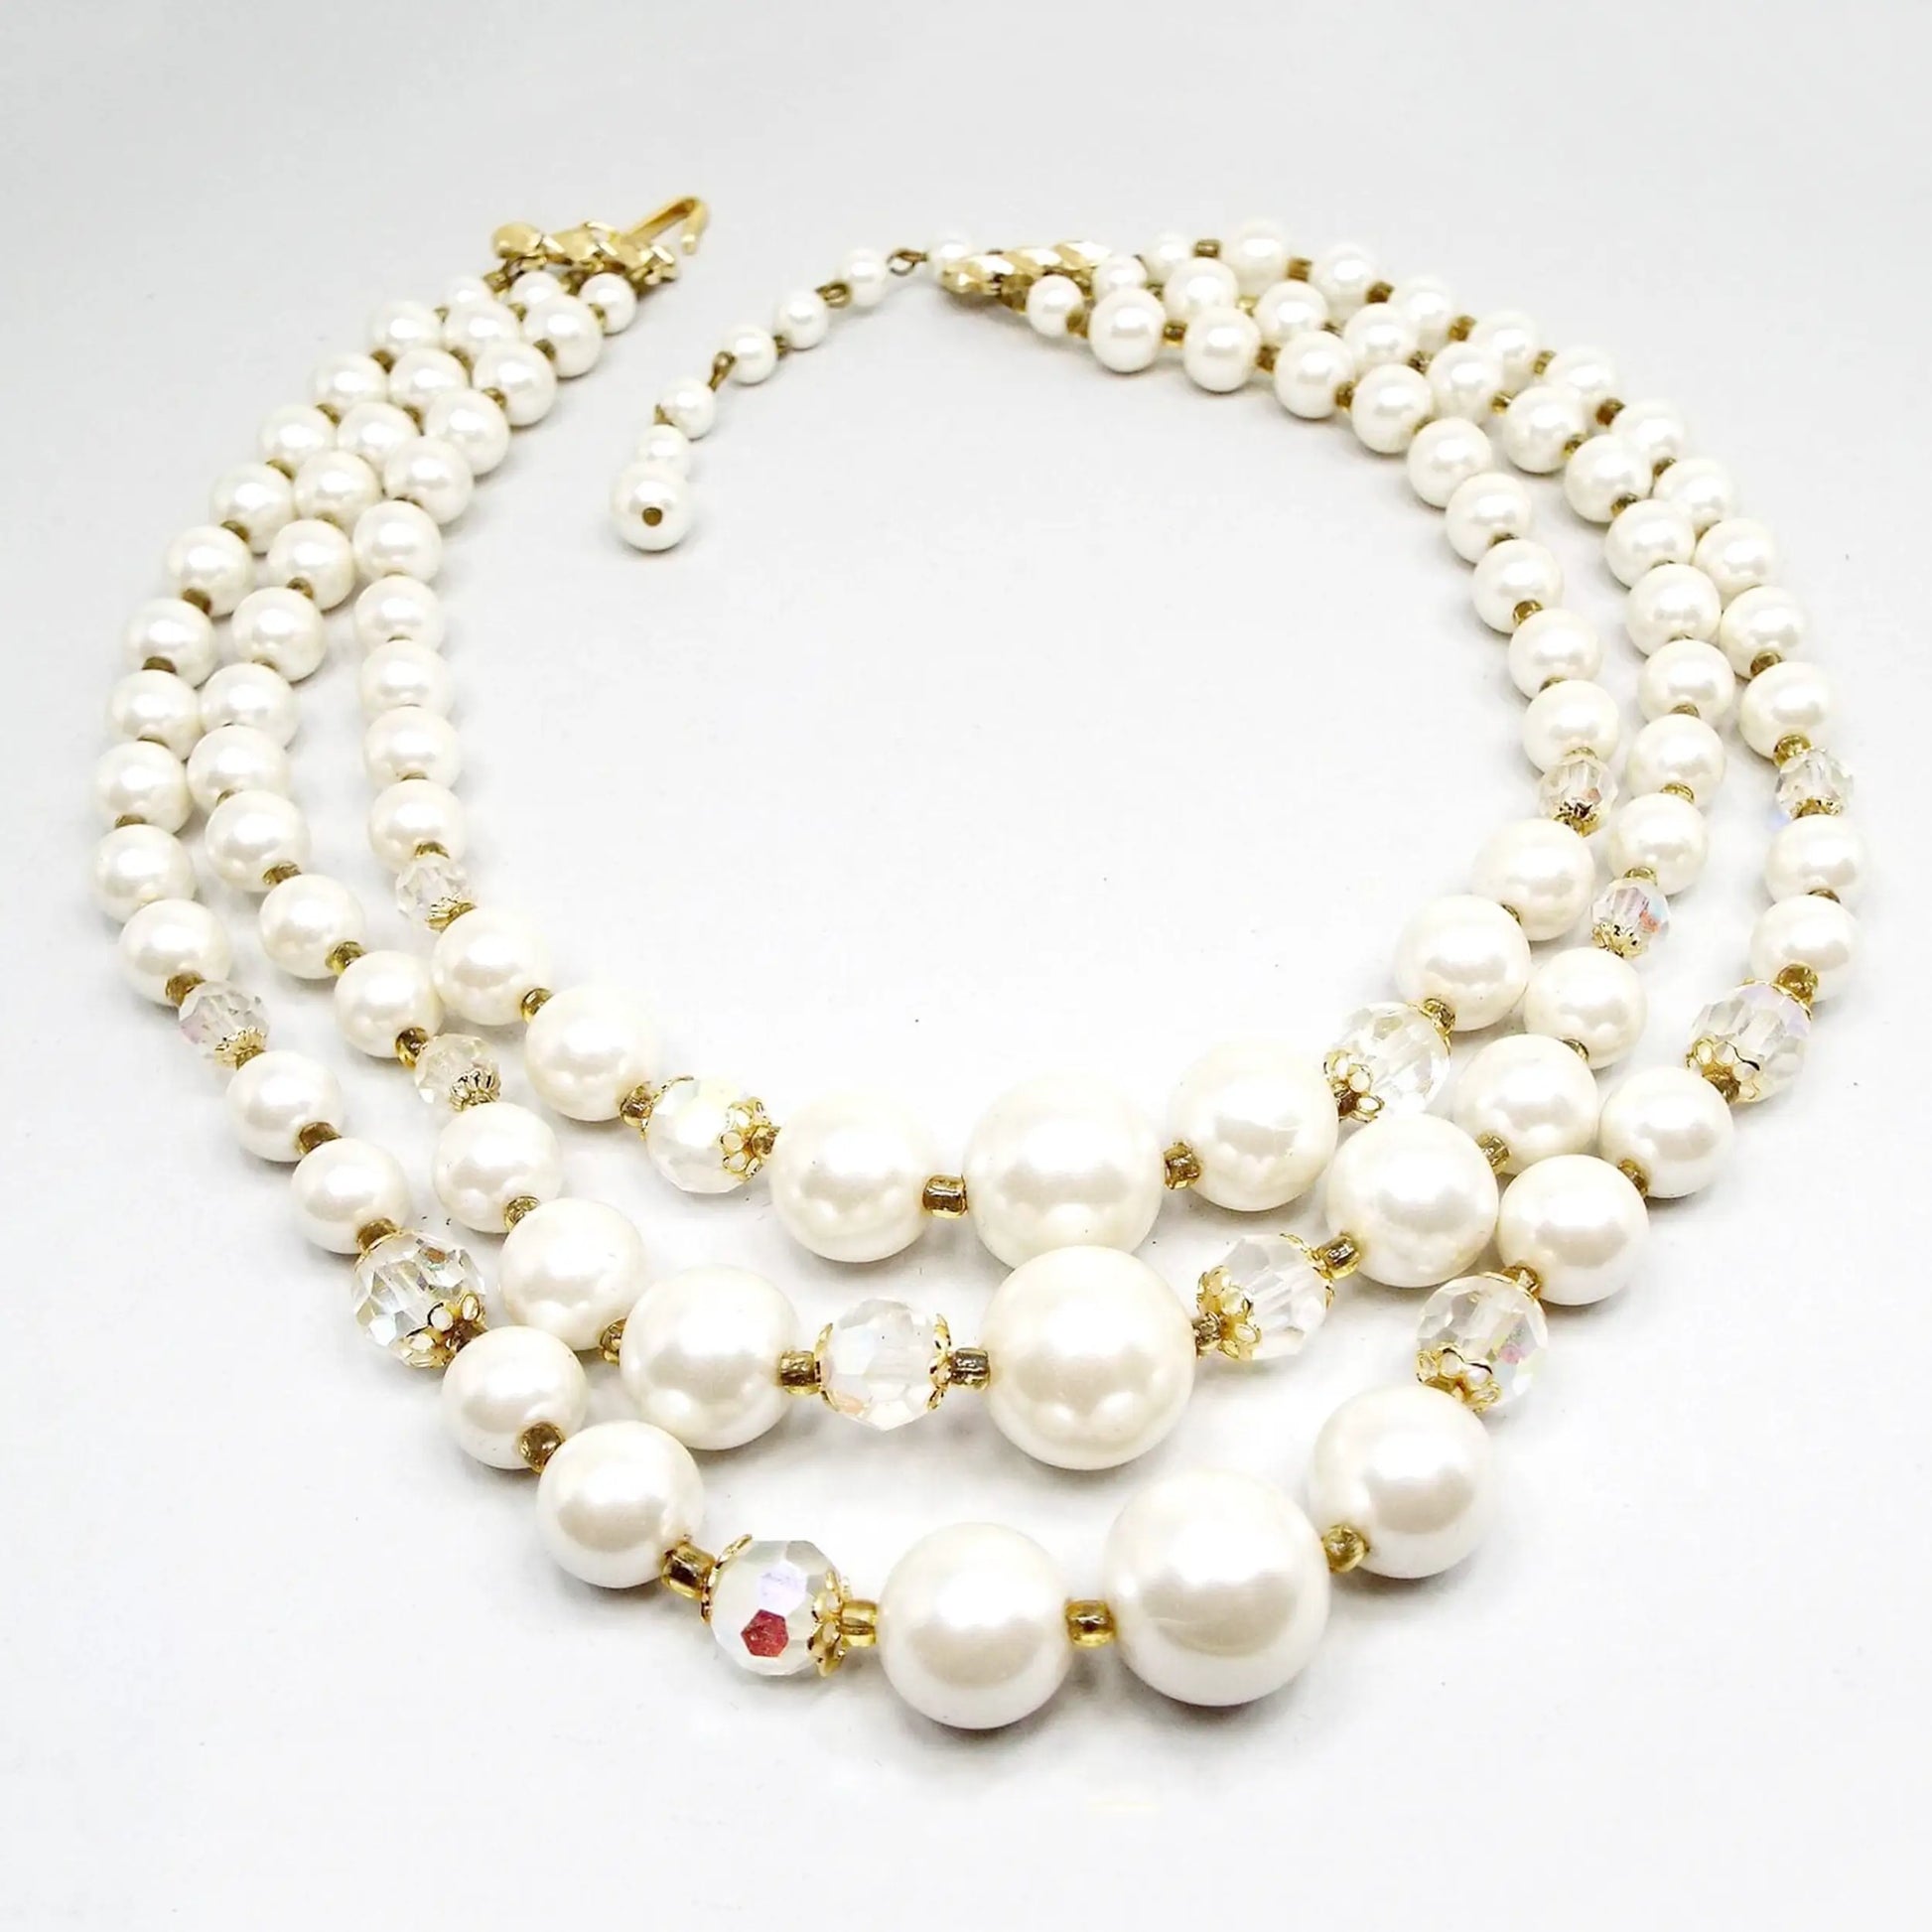 Front view of the Japanese Mid Century vintage multi strand necklace with AB crystal and faux pearl beads. There are three beaded strands with a gold tone color hook clasp at the end. Each strand has white plastic imitation pearl beads and a few AB glass crystal beads towards the bottom of the necklace. There are small gold tone color beads in between the other beads as spacers.